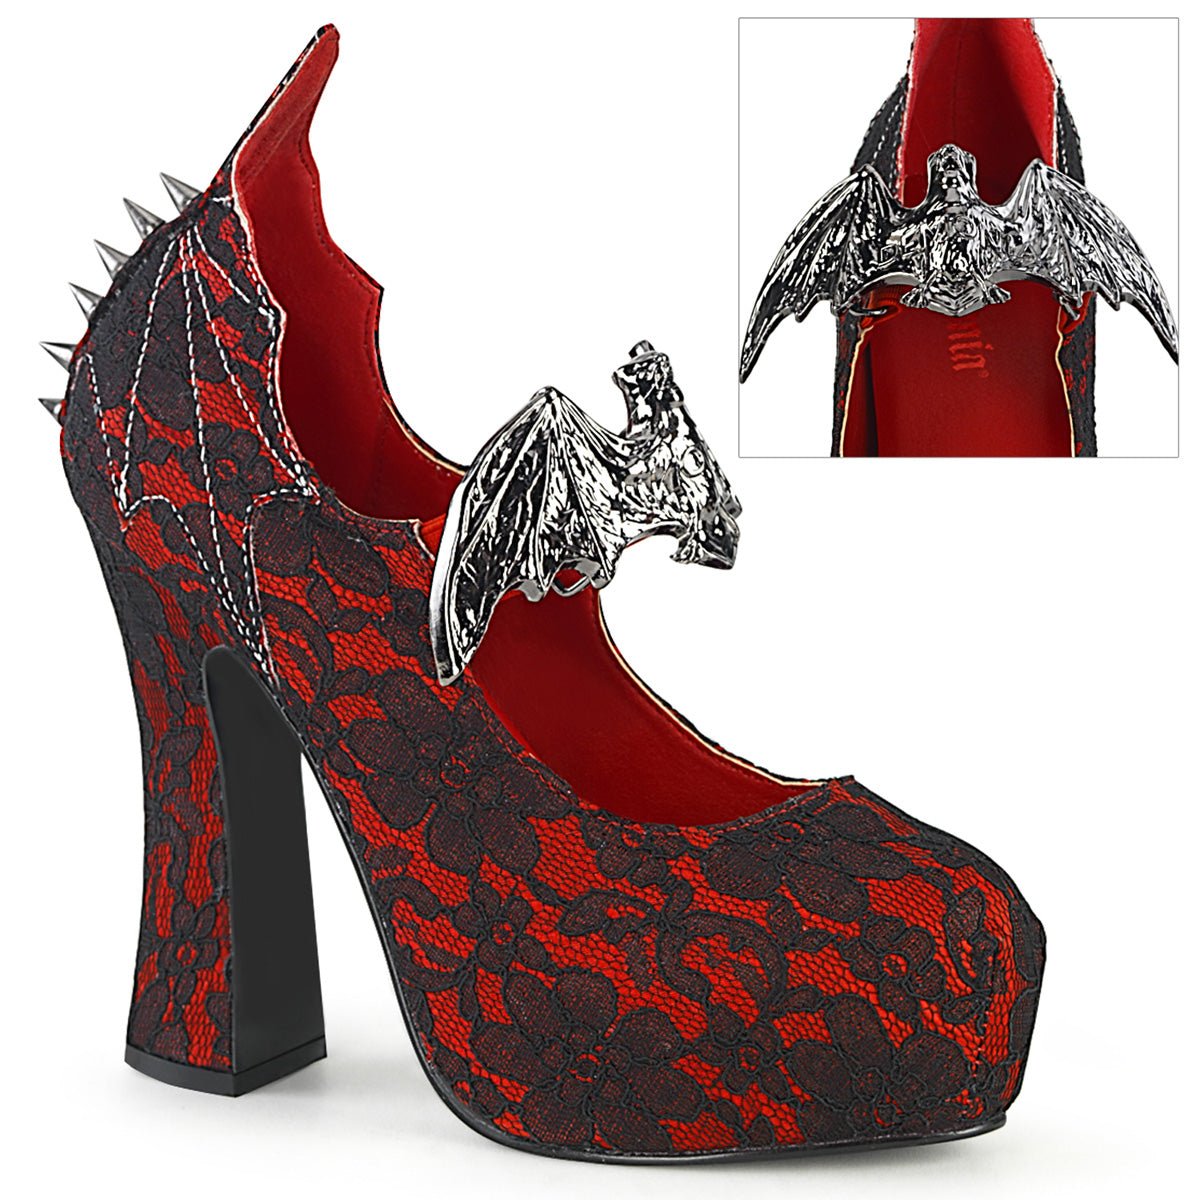 Clearance DemoniaCult Demon 18 Red Satin Size 4UK/7USA - From Clearance Sold By Alternative Footwear